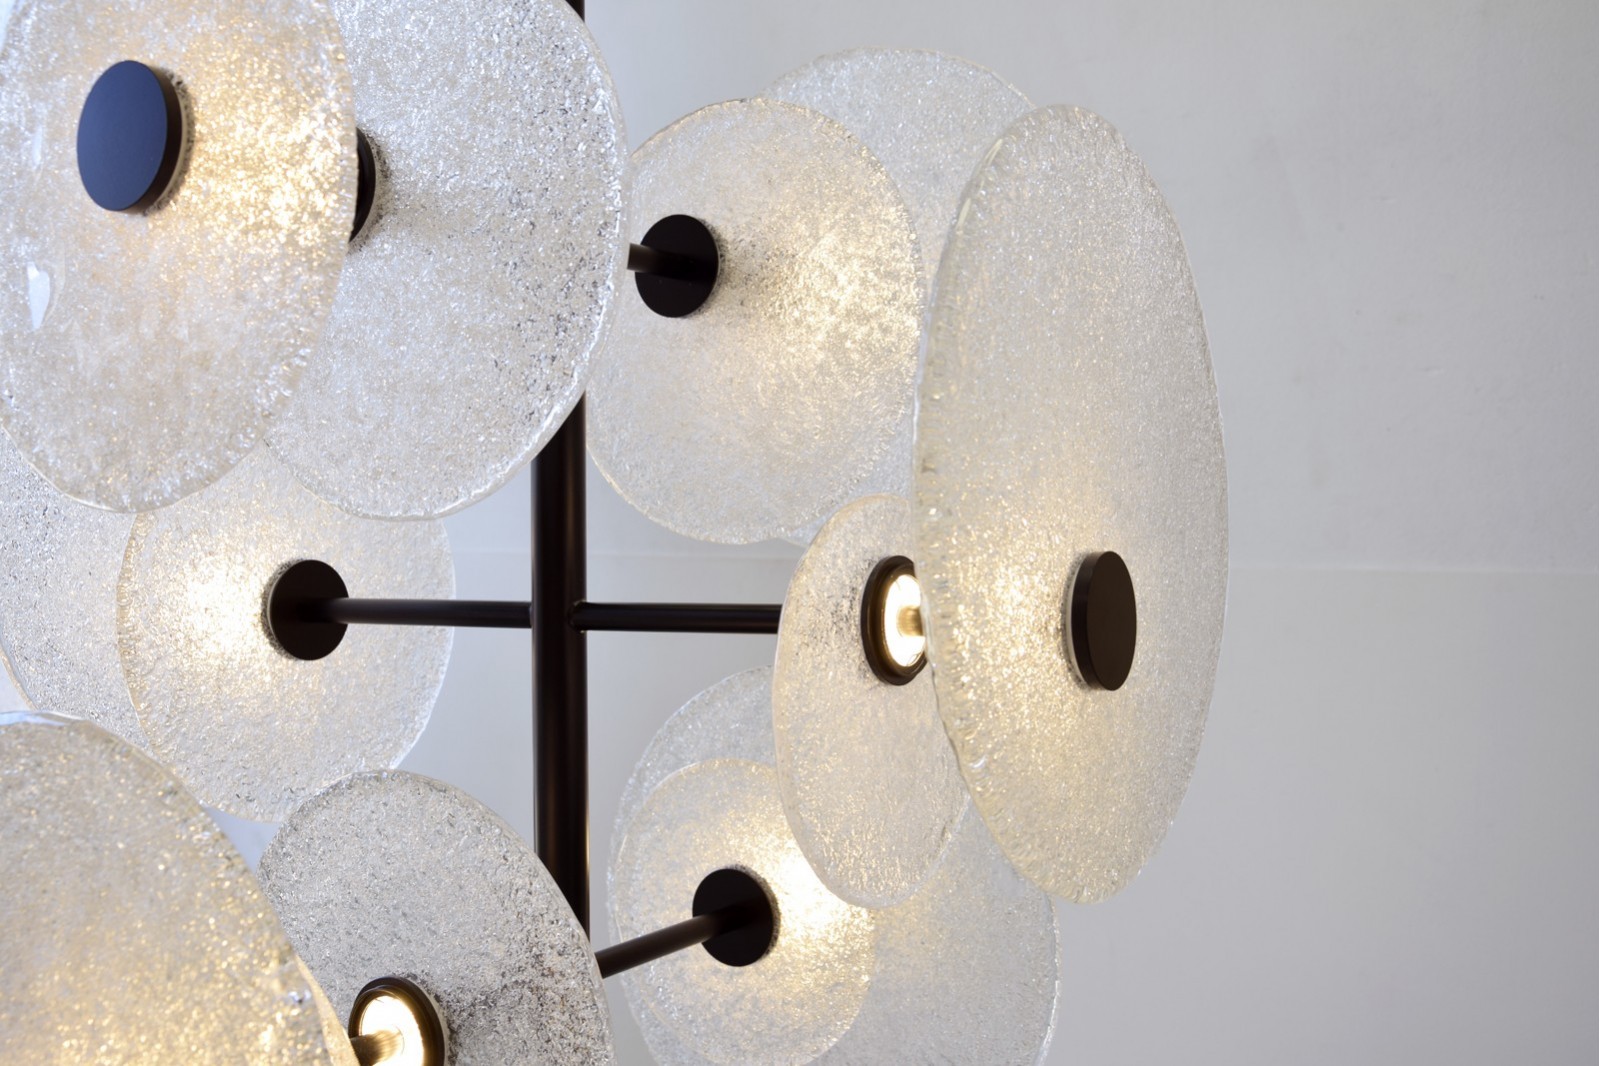 CEILING LAMP "DISCOS". GLASS AND METAL.LED